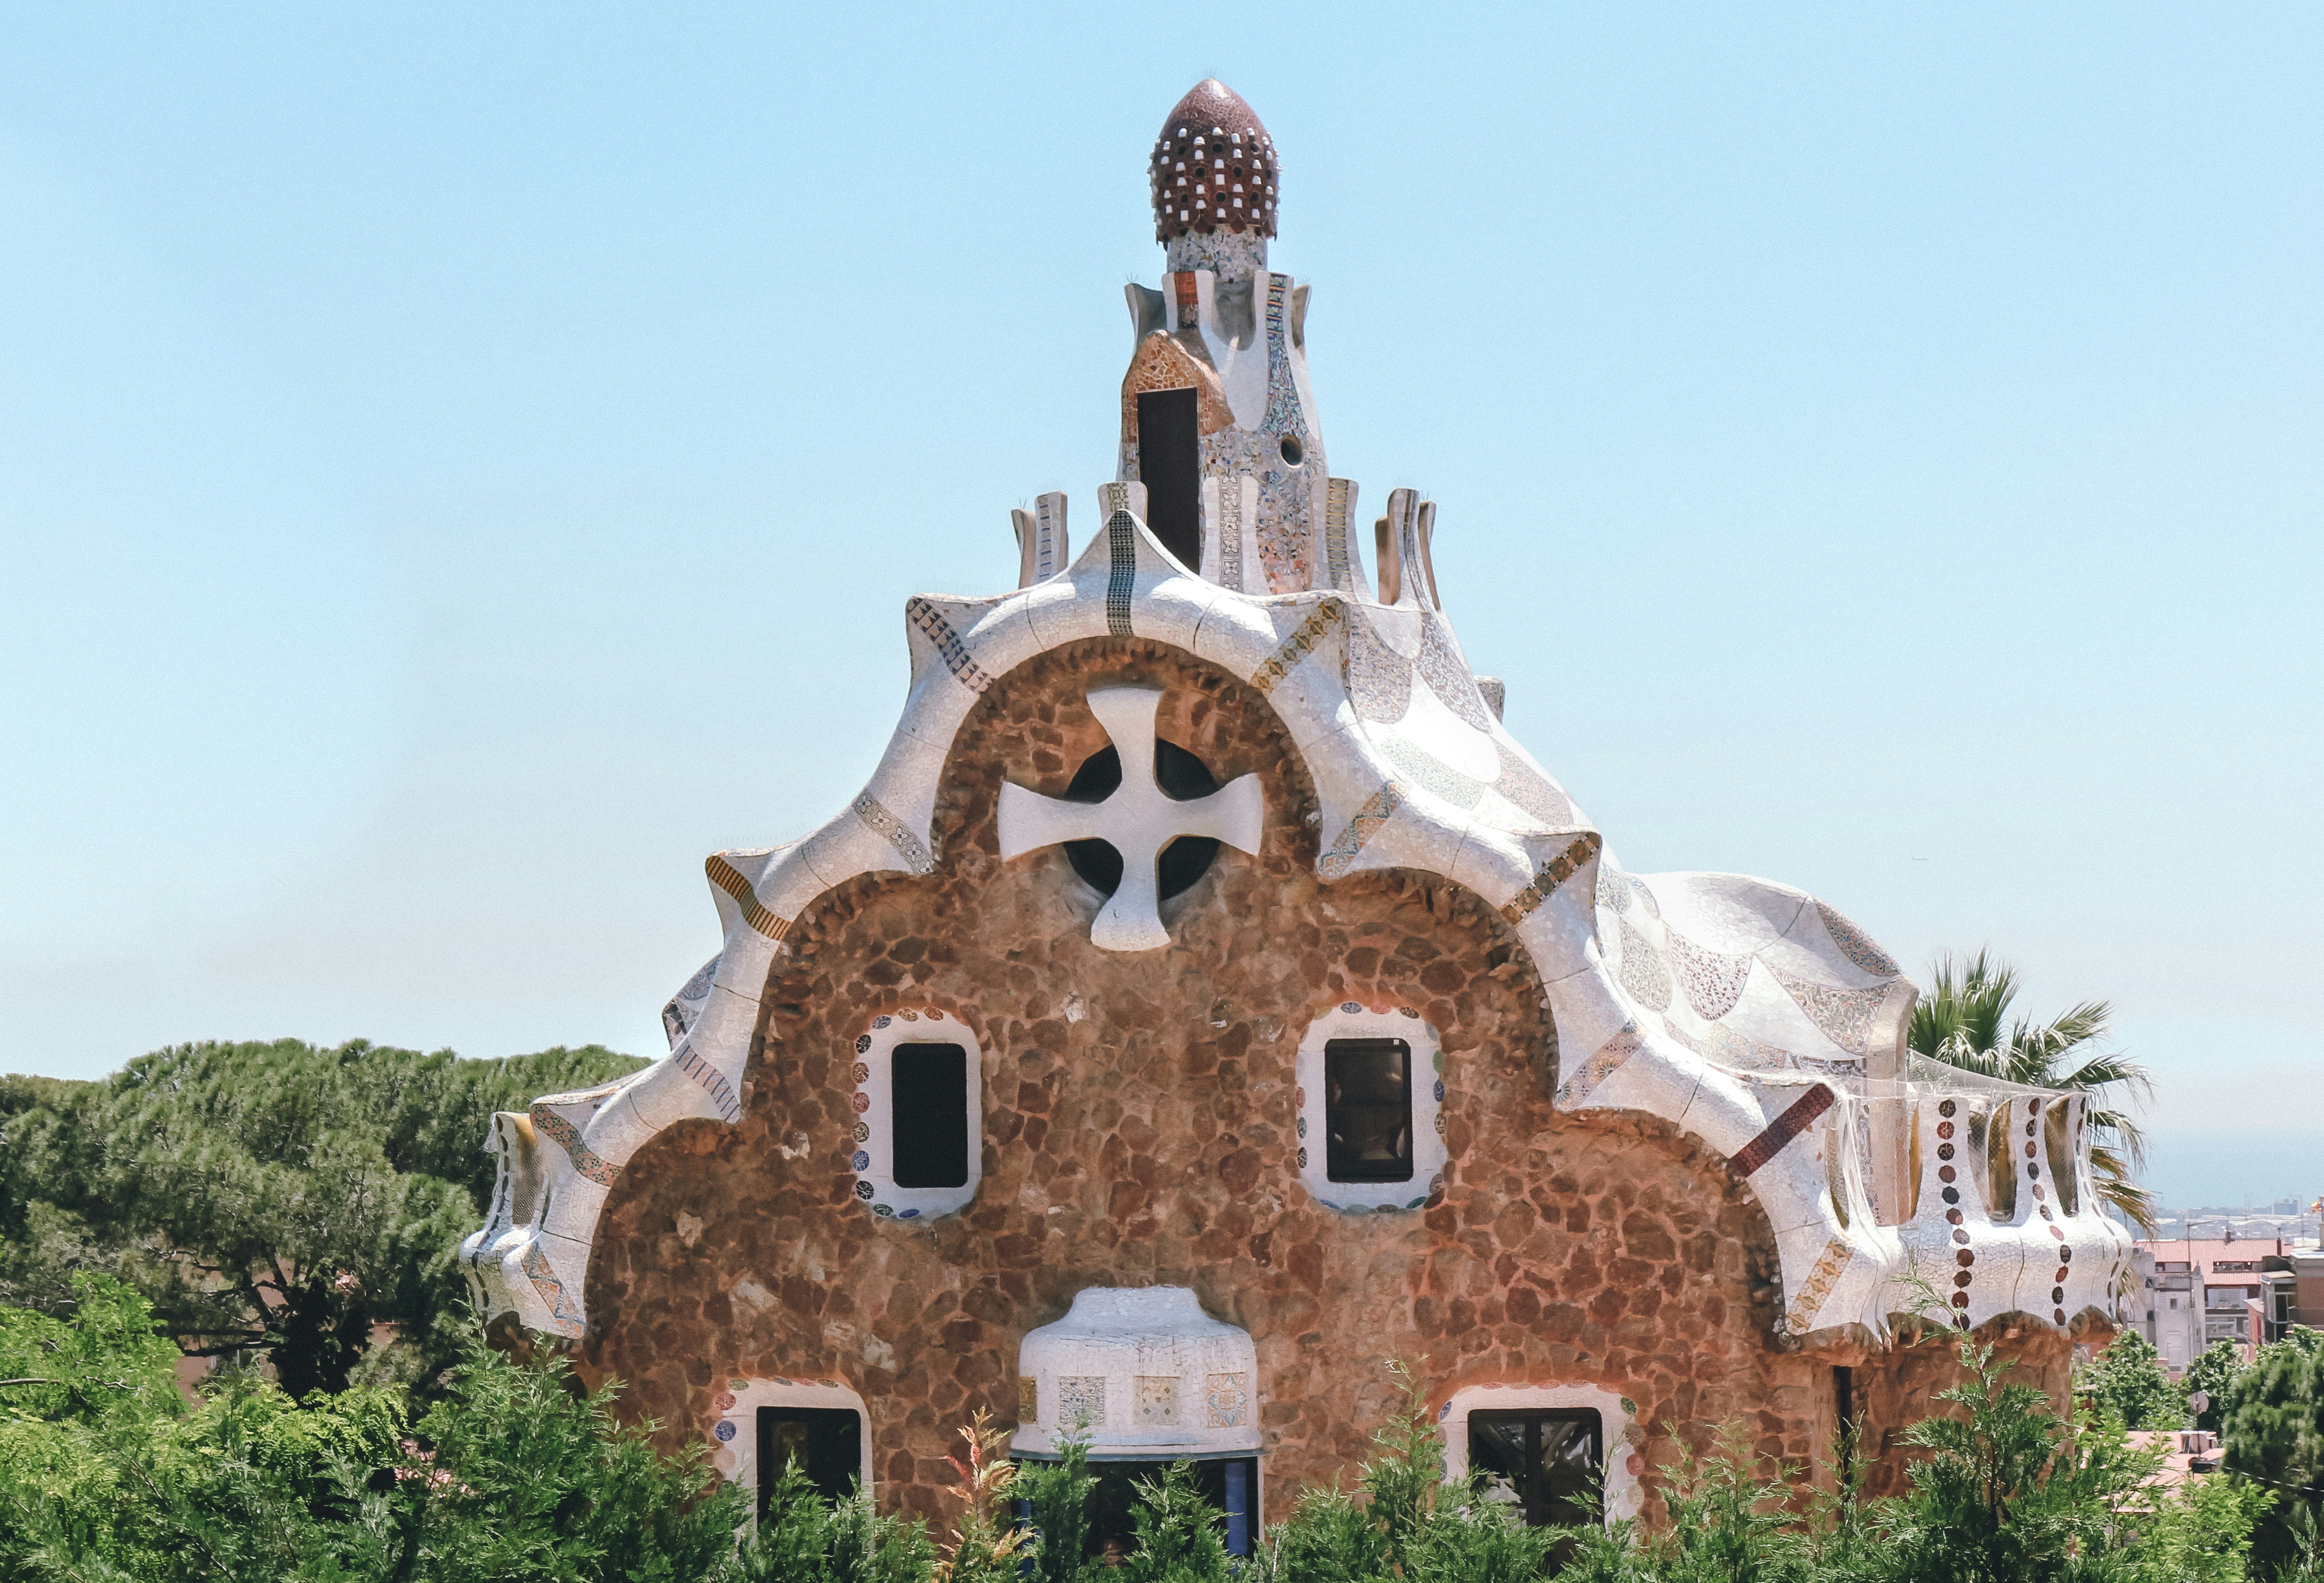 The roof of one of the church towers at Park Güell